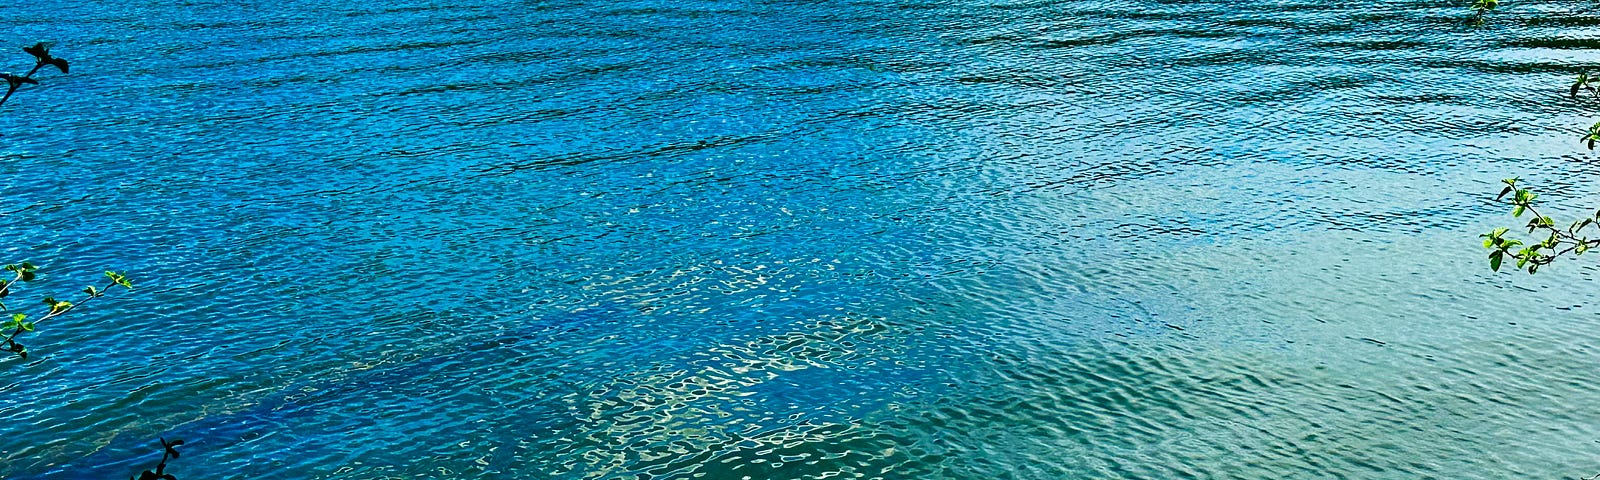 Ripples on the surface of a blue-green lake.